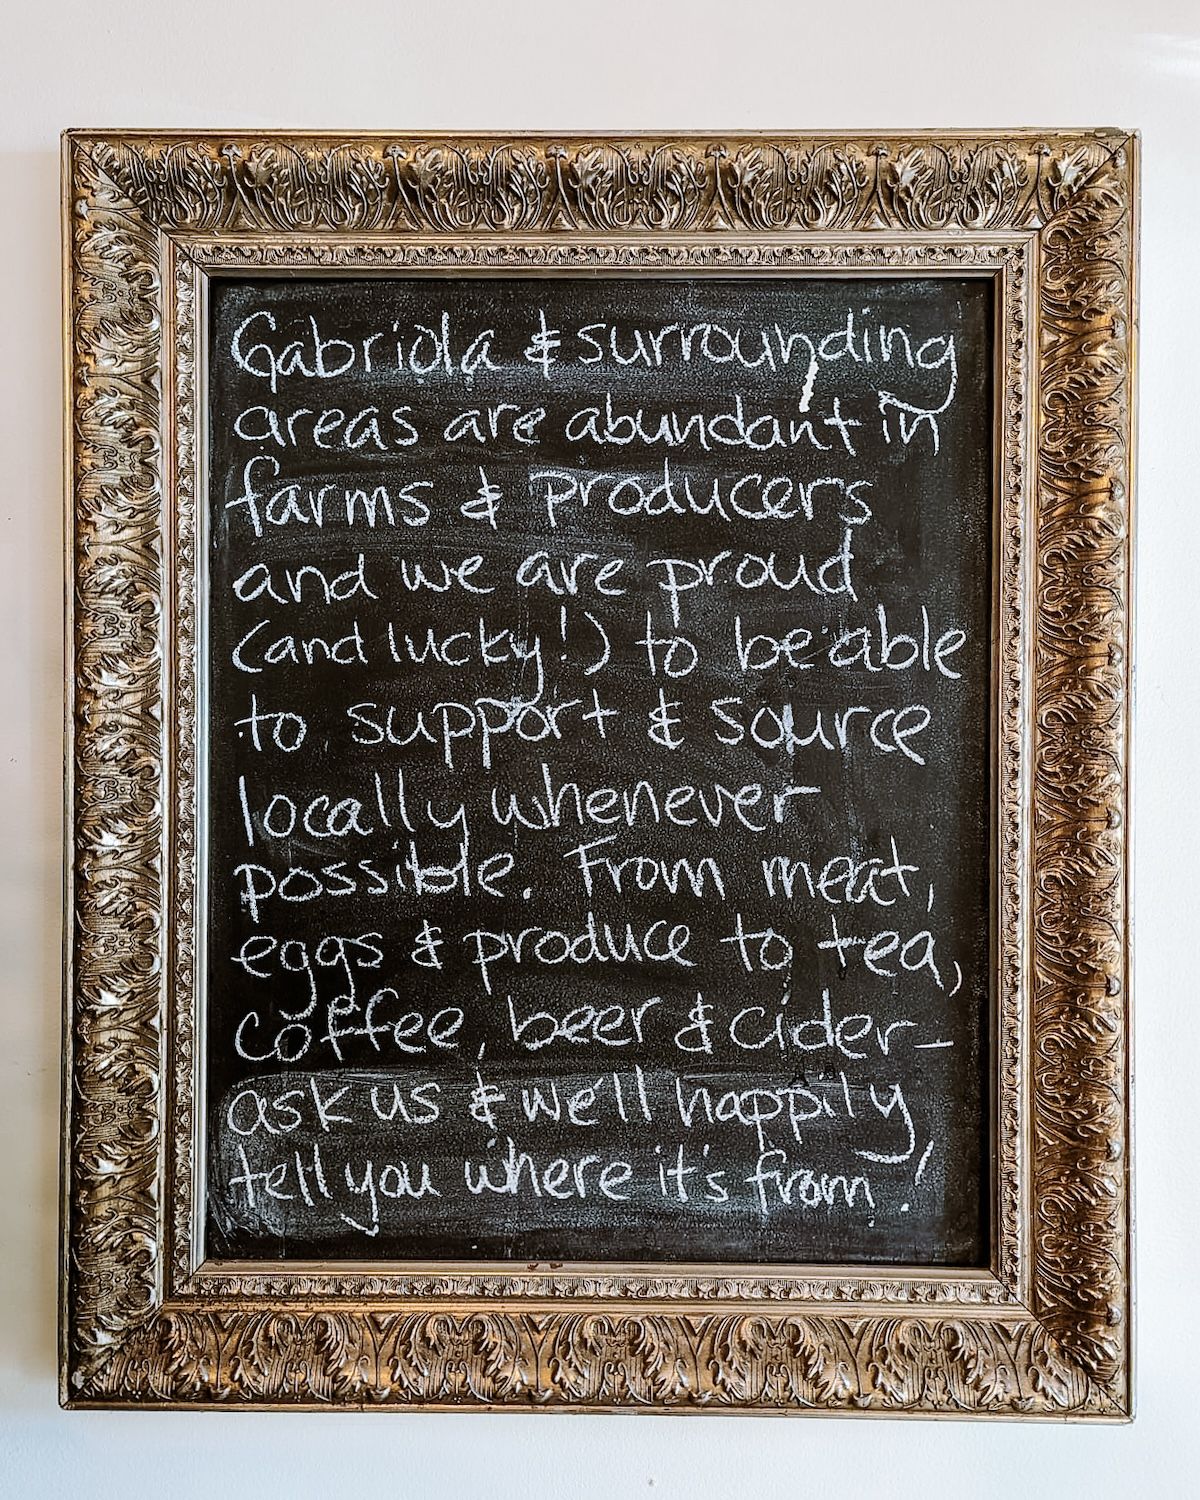 Chalk board in Ground up Cafe describing how they support and source locally